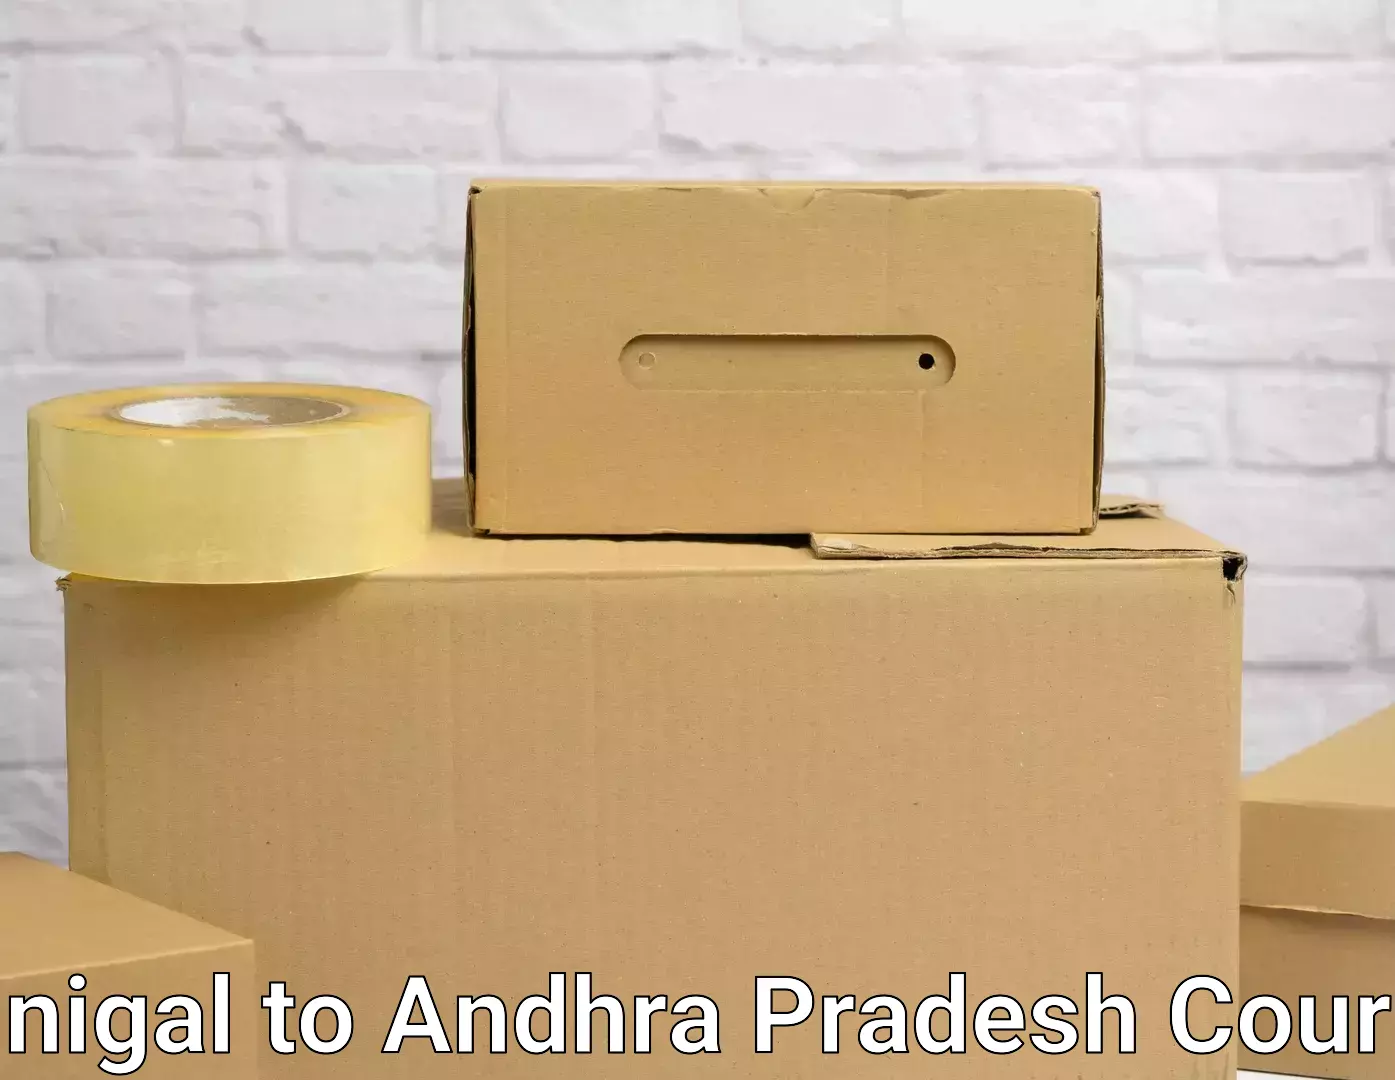 Efficient moving company in Kunigal to Visakhapatnam Port